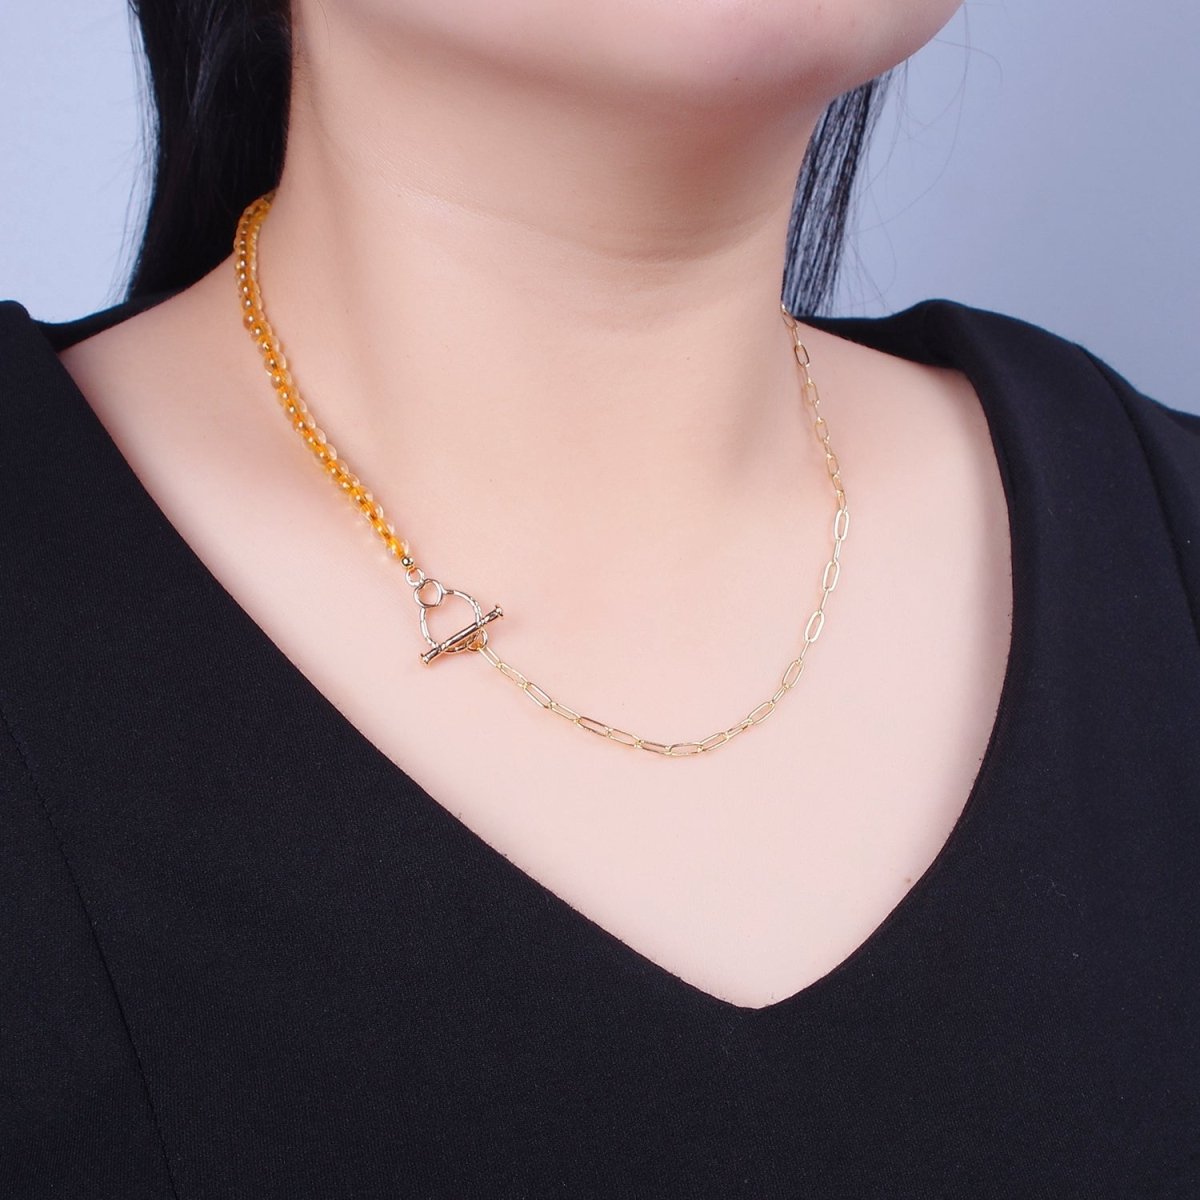 Dainty Half Bead Half Link Chain Necklace, 24k Gold Filled Paperclip Chain with Yellow Quartz Necklace | WA-964 Clearance Pricing - DLUXCA